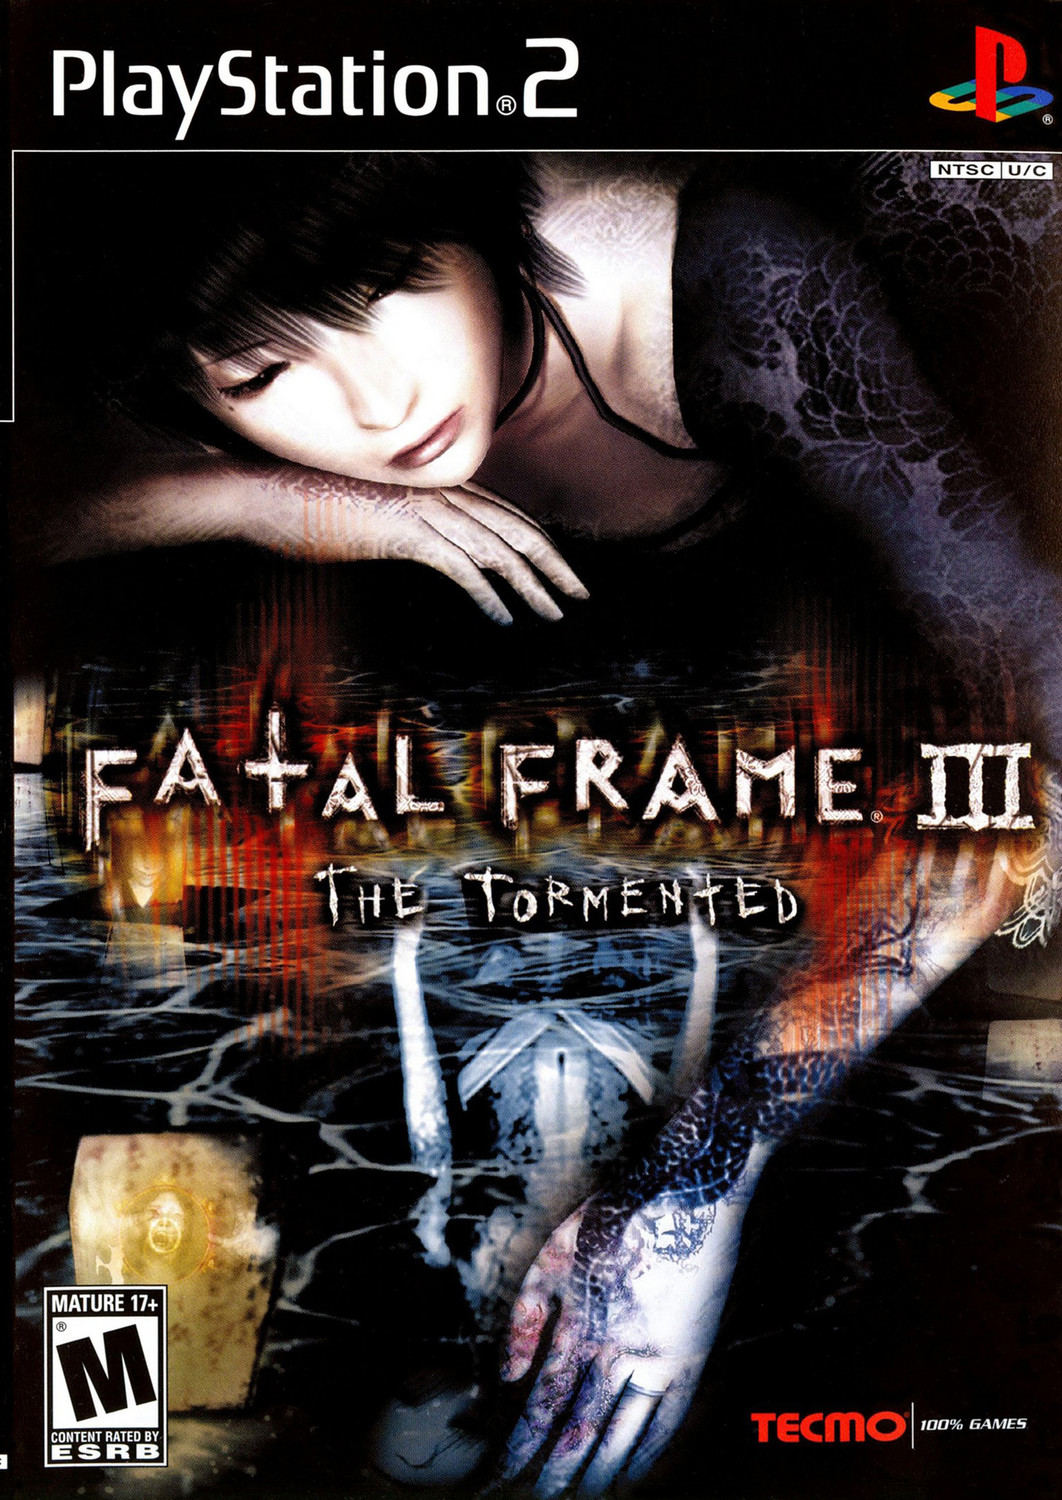 playstation-2-ps2-fatal-frame-iii-the-tormented.jpg